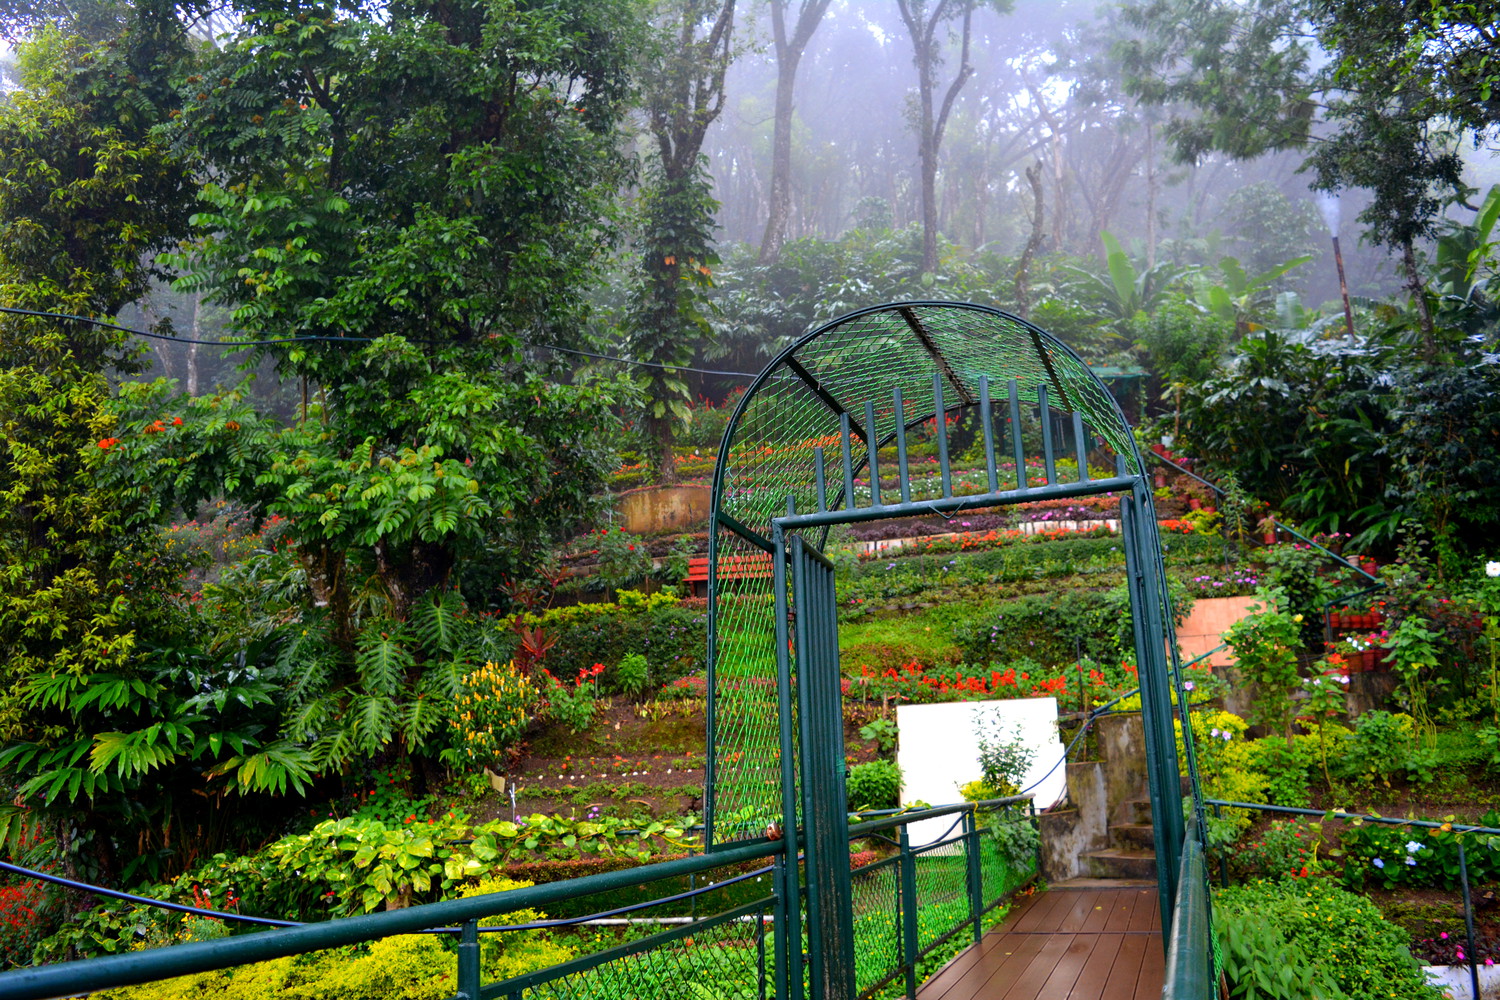 A garden of flowers at the bottom, tall trees covered in mist at the top, and a staircase to climb this garden along the slope of a hill